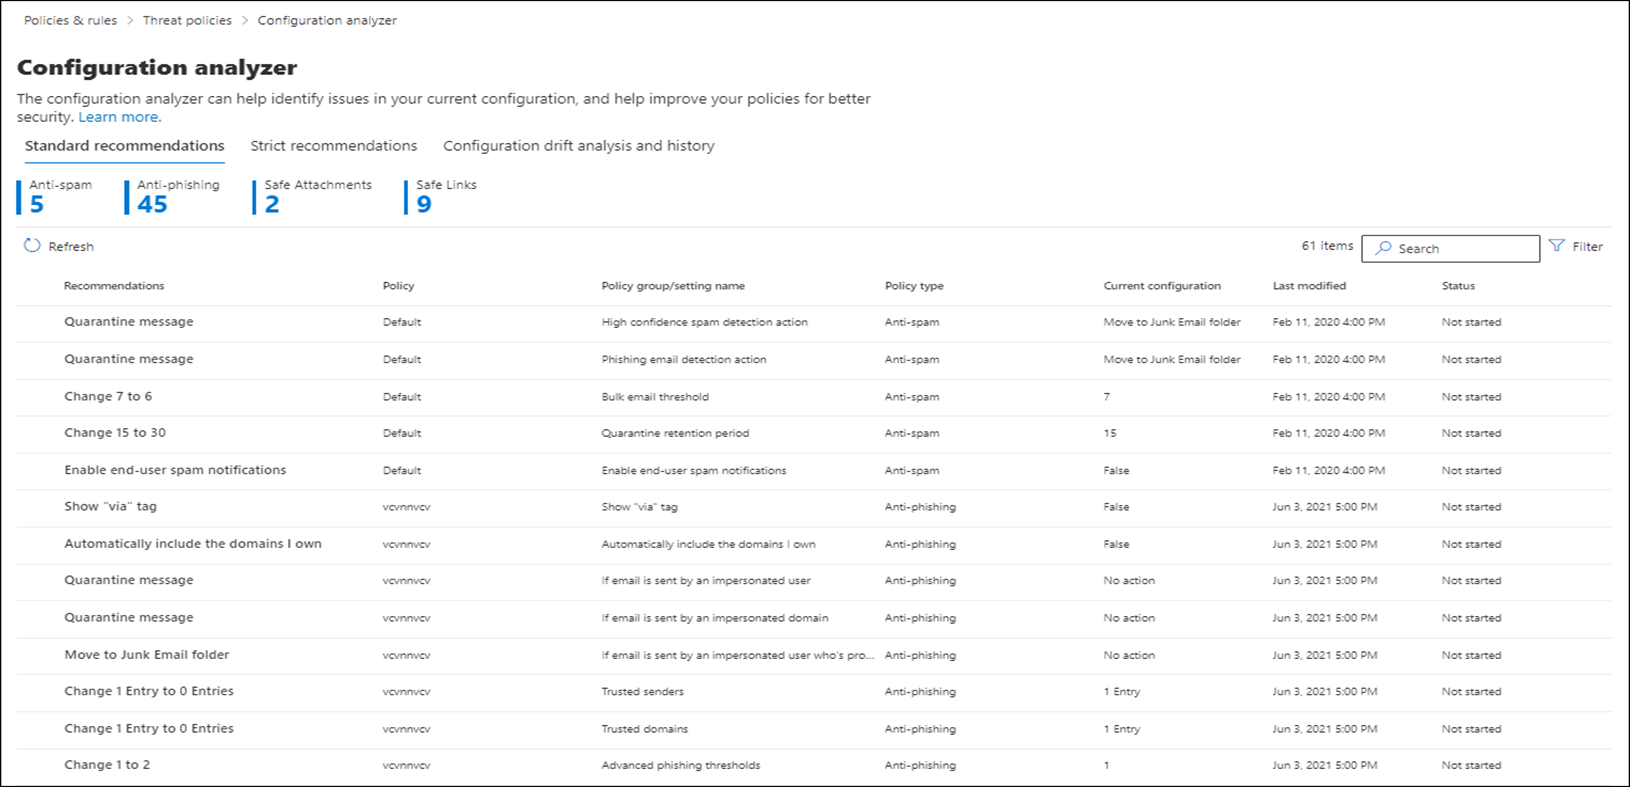 screenshot showing the expanded view of the Configuration analyzer in the Microsoft Defender portal